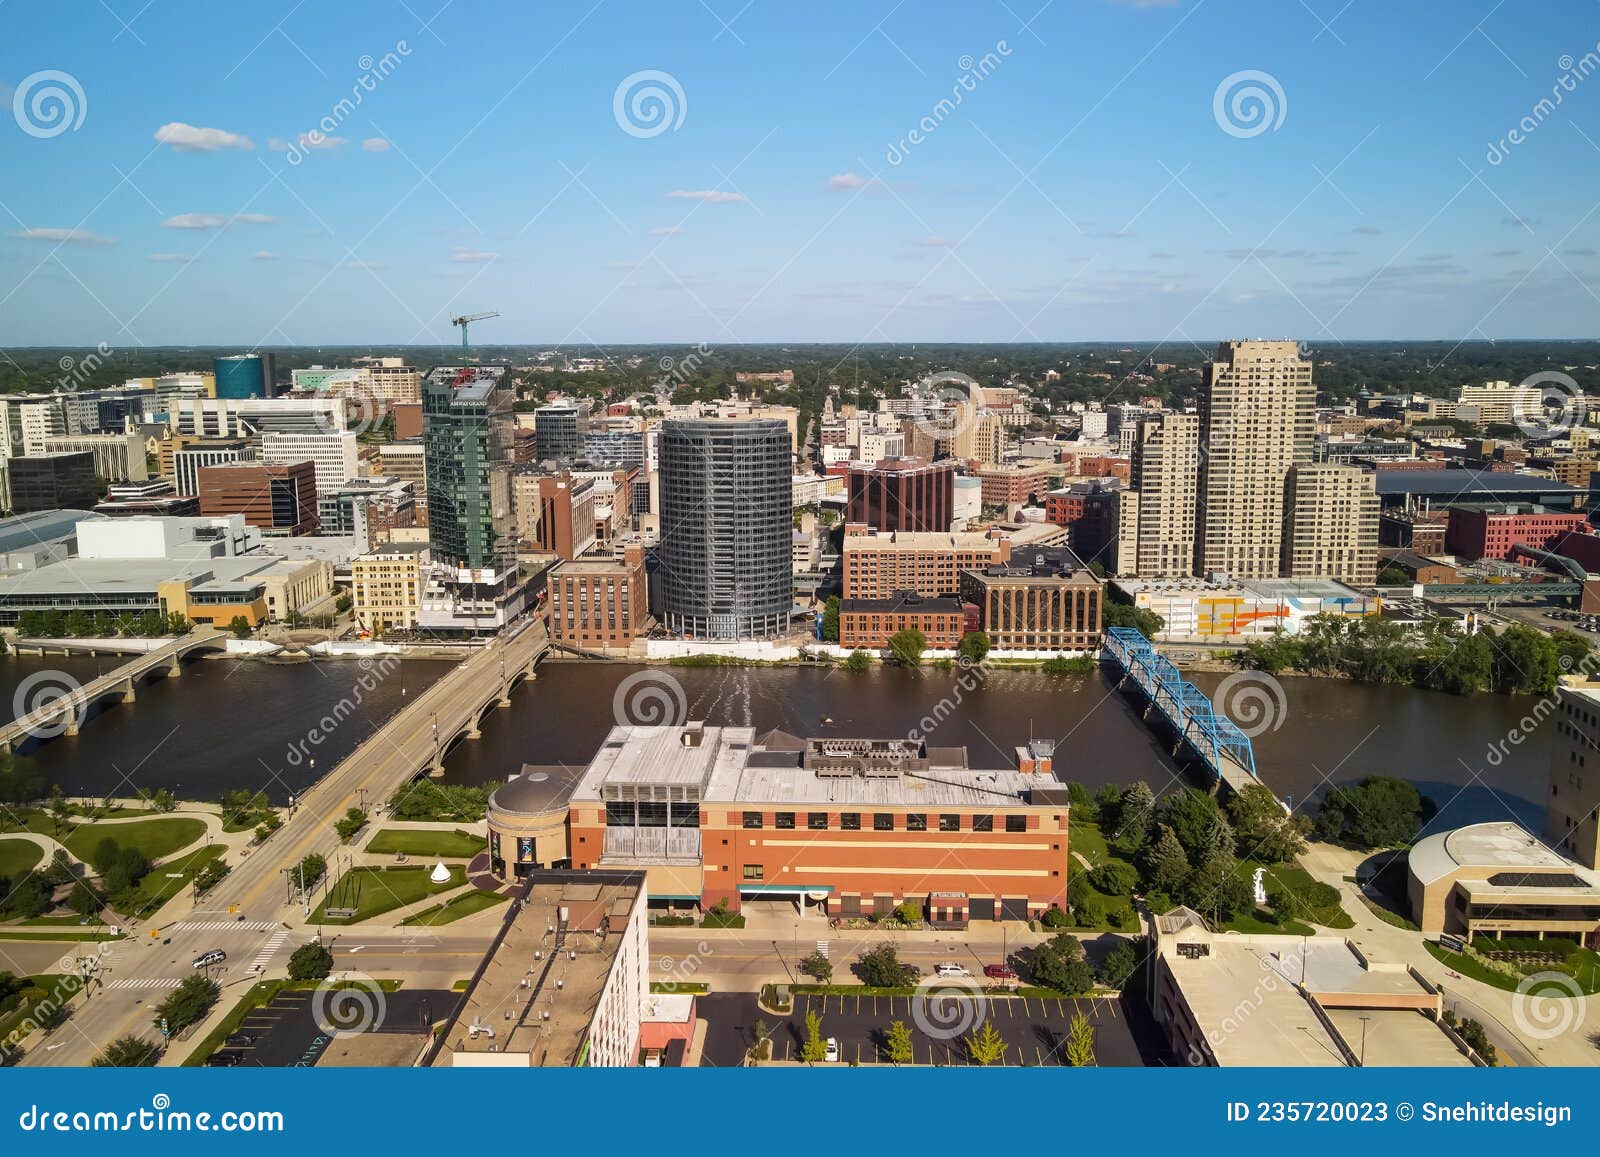 Downtown Grand Rapids is Second Largest Metropolitan Area in Entire ...